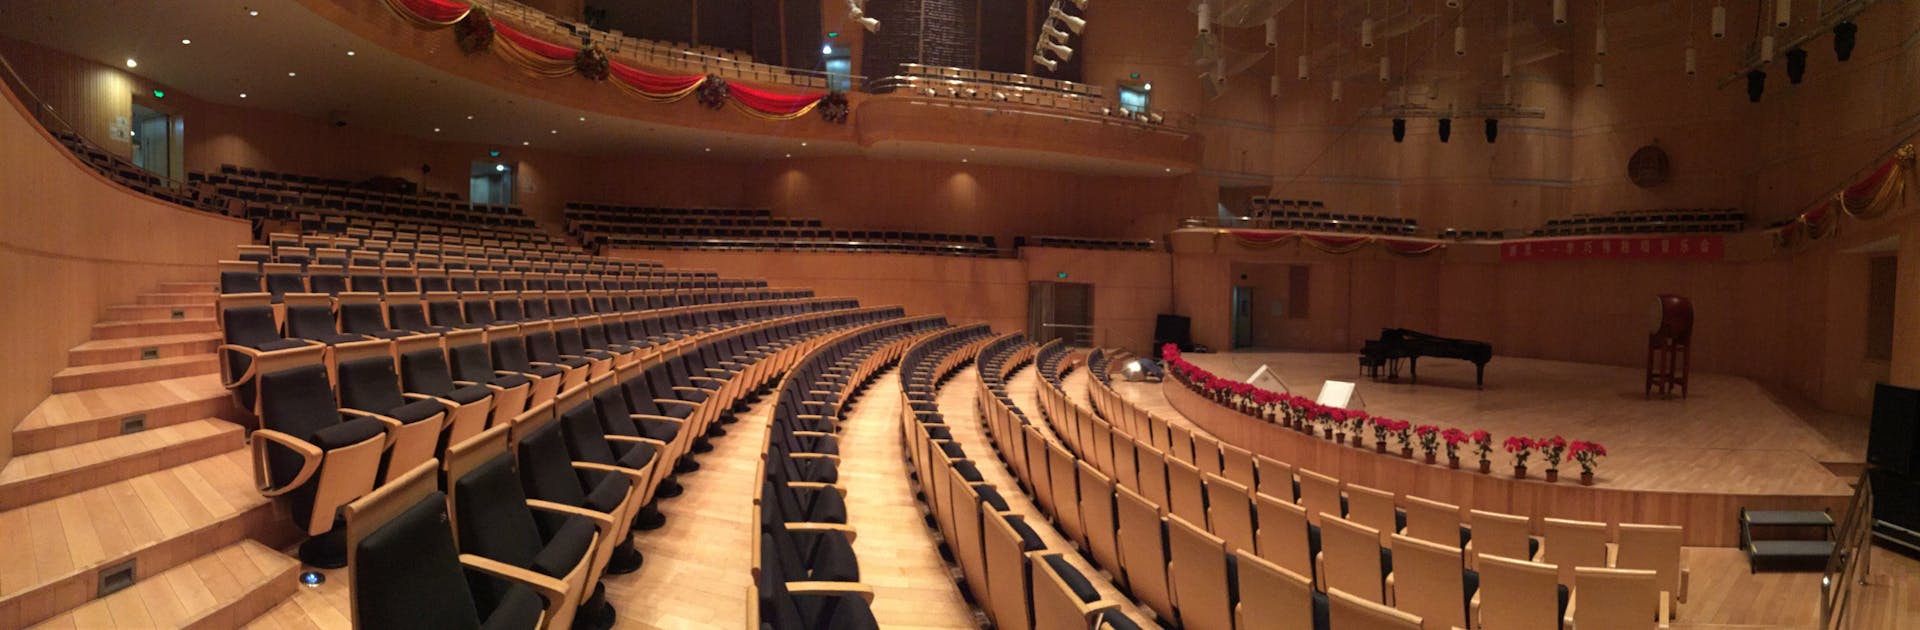 An auditorium with empty chairs | Source: Pexels